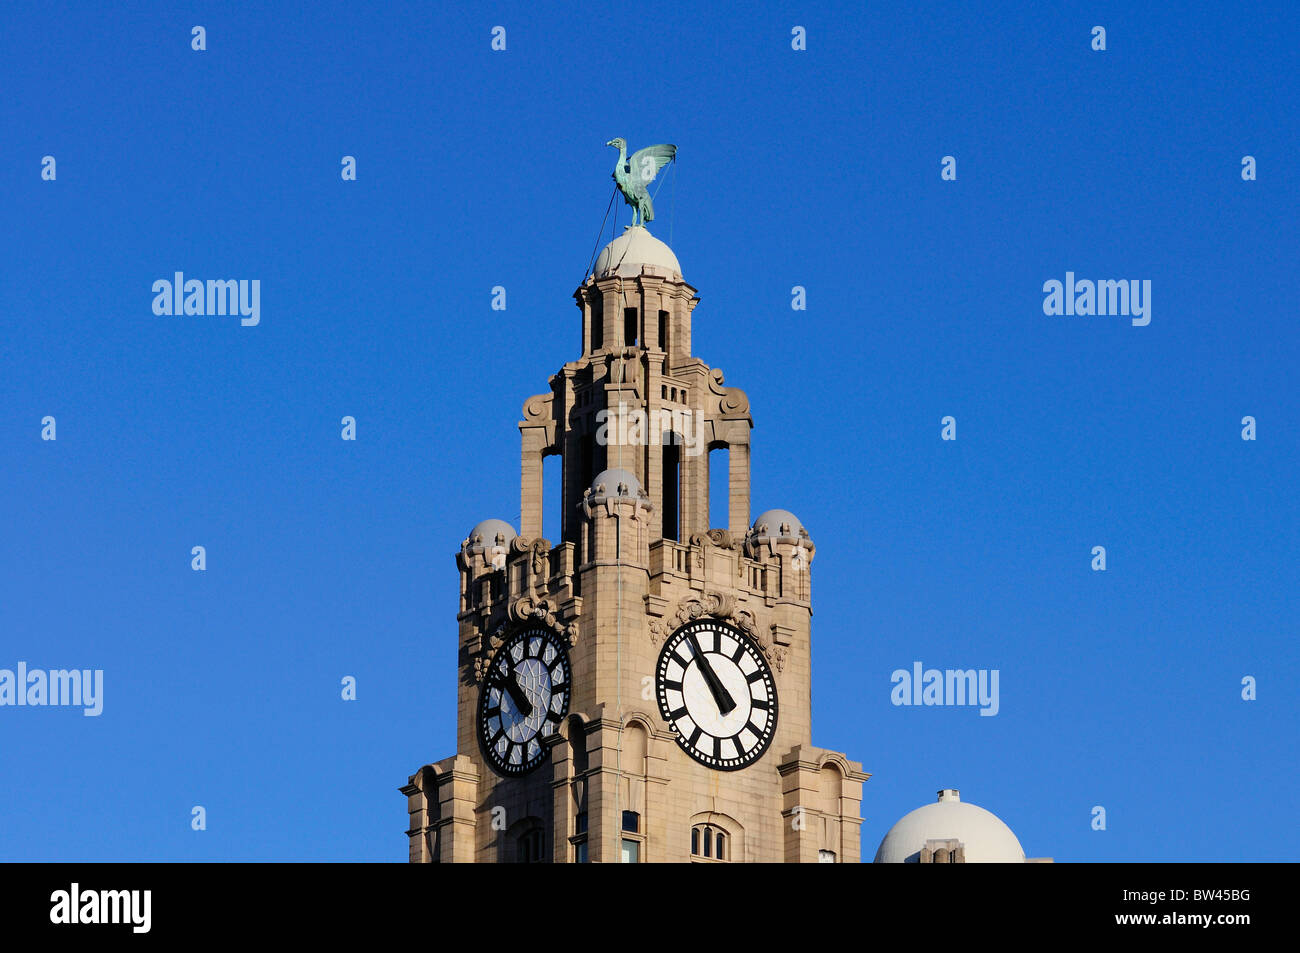 The Royal Liver Clock, Royal Liver Building, Liverpool Waterfront, Merseyside, North West England, United Kingdom Stock Photo